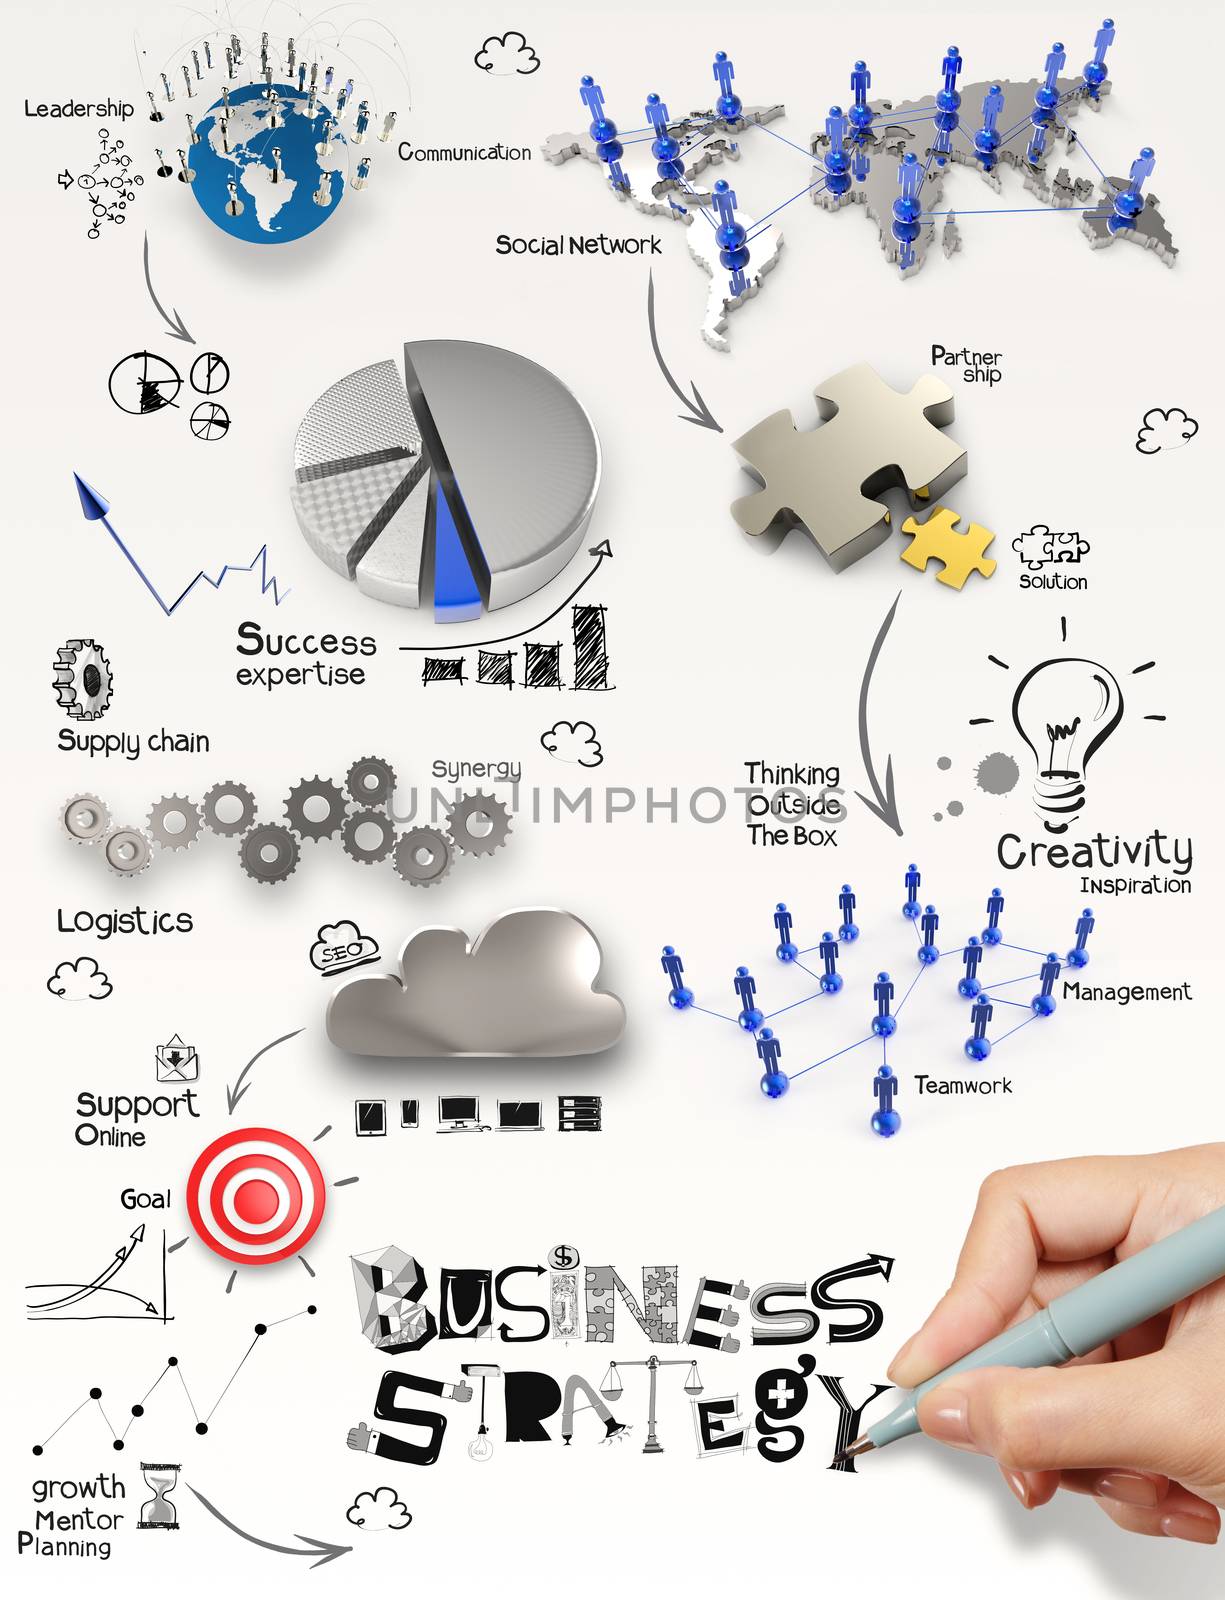 hand drawing business strategy diagram and icons 3d on paper background as concept